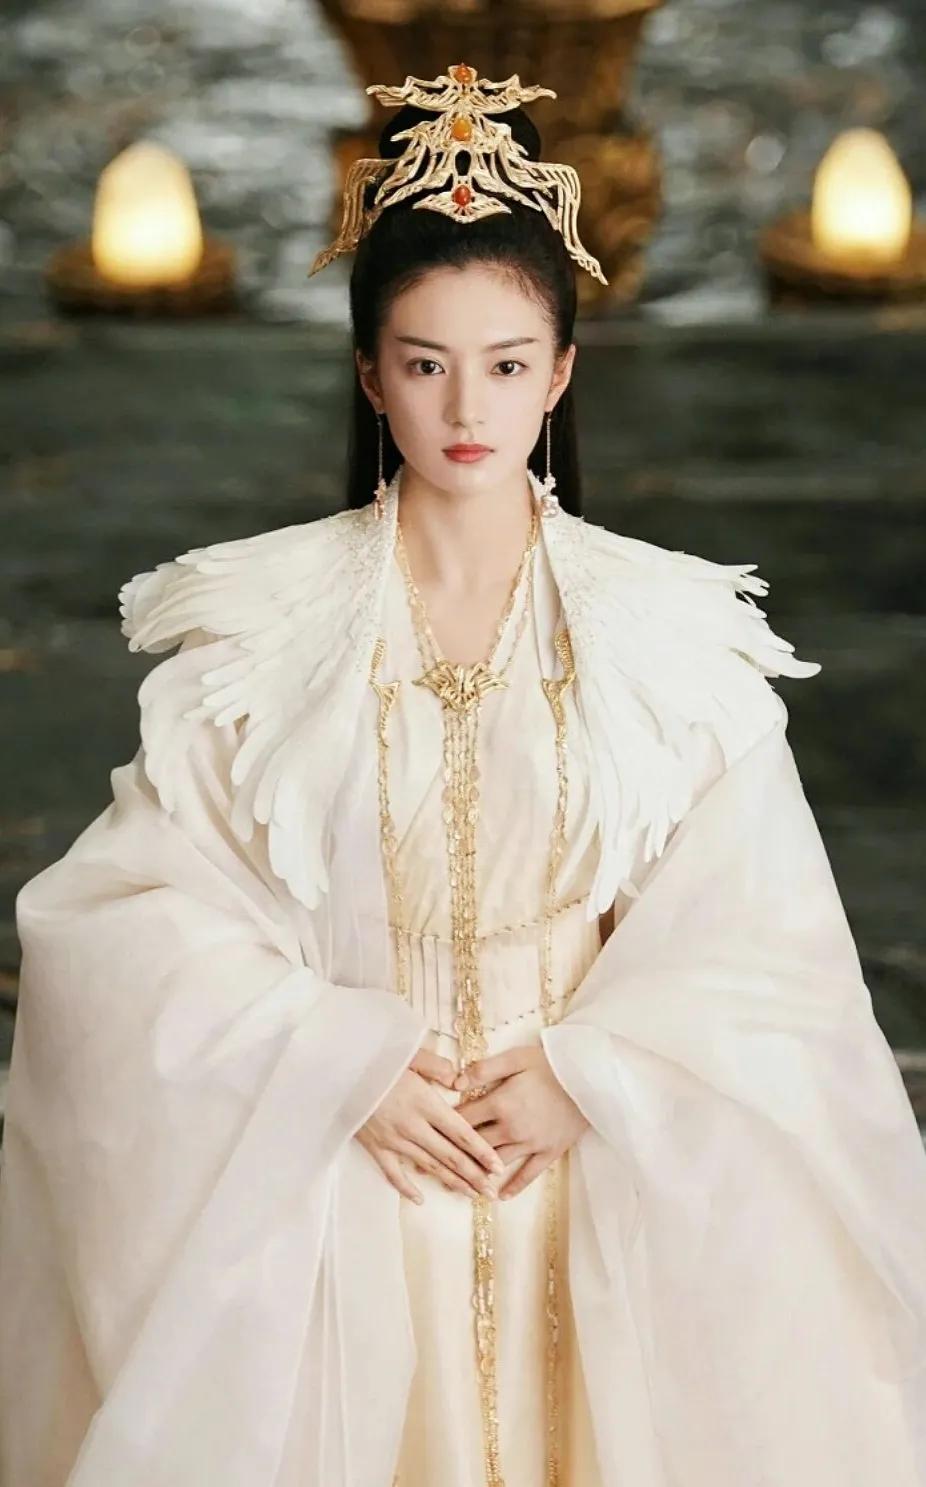 Feng Ran played by Zhang Yaqin in 